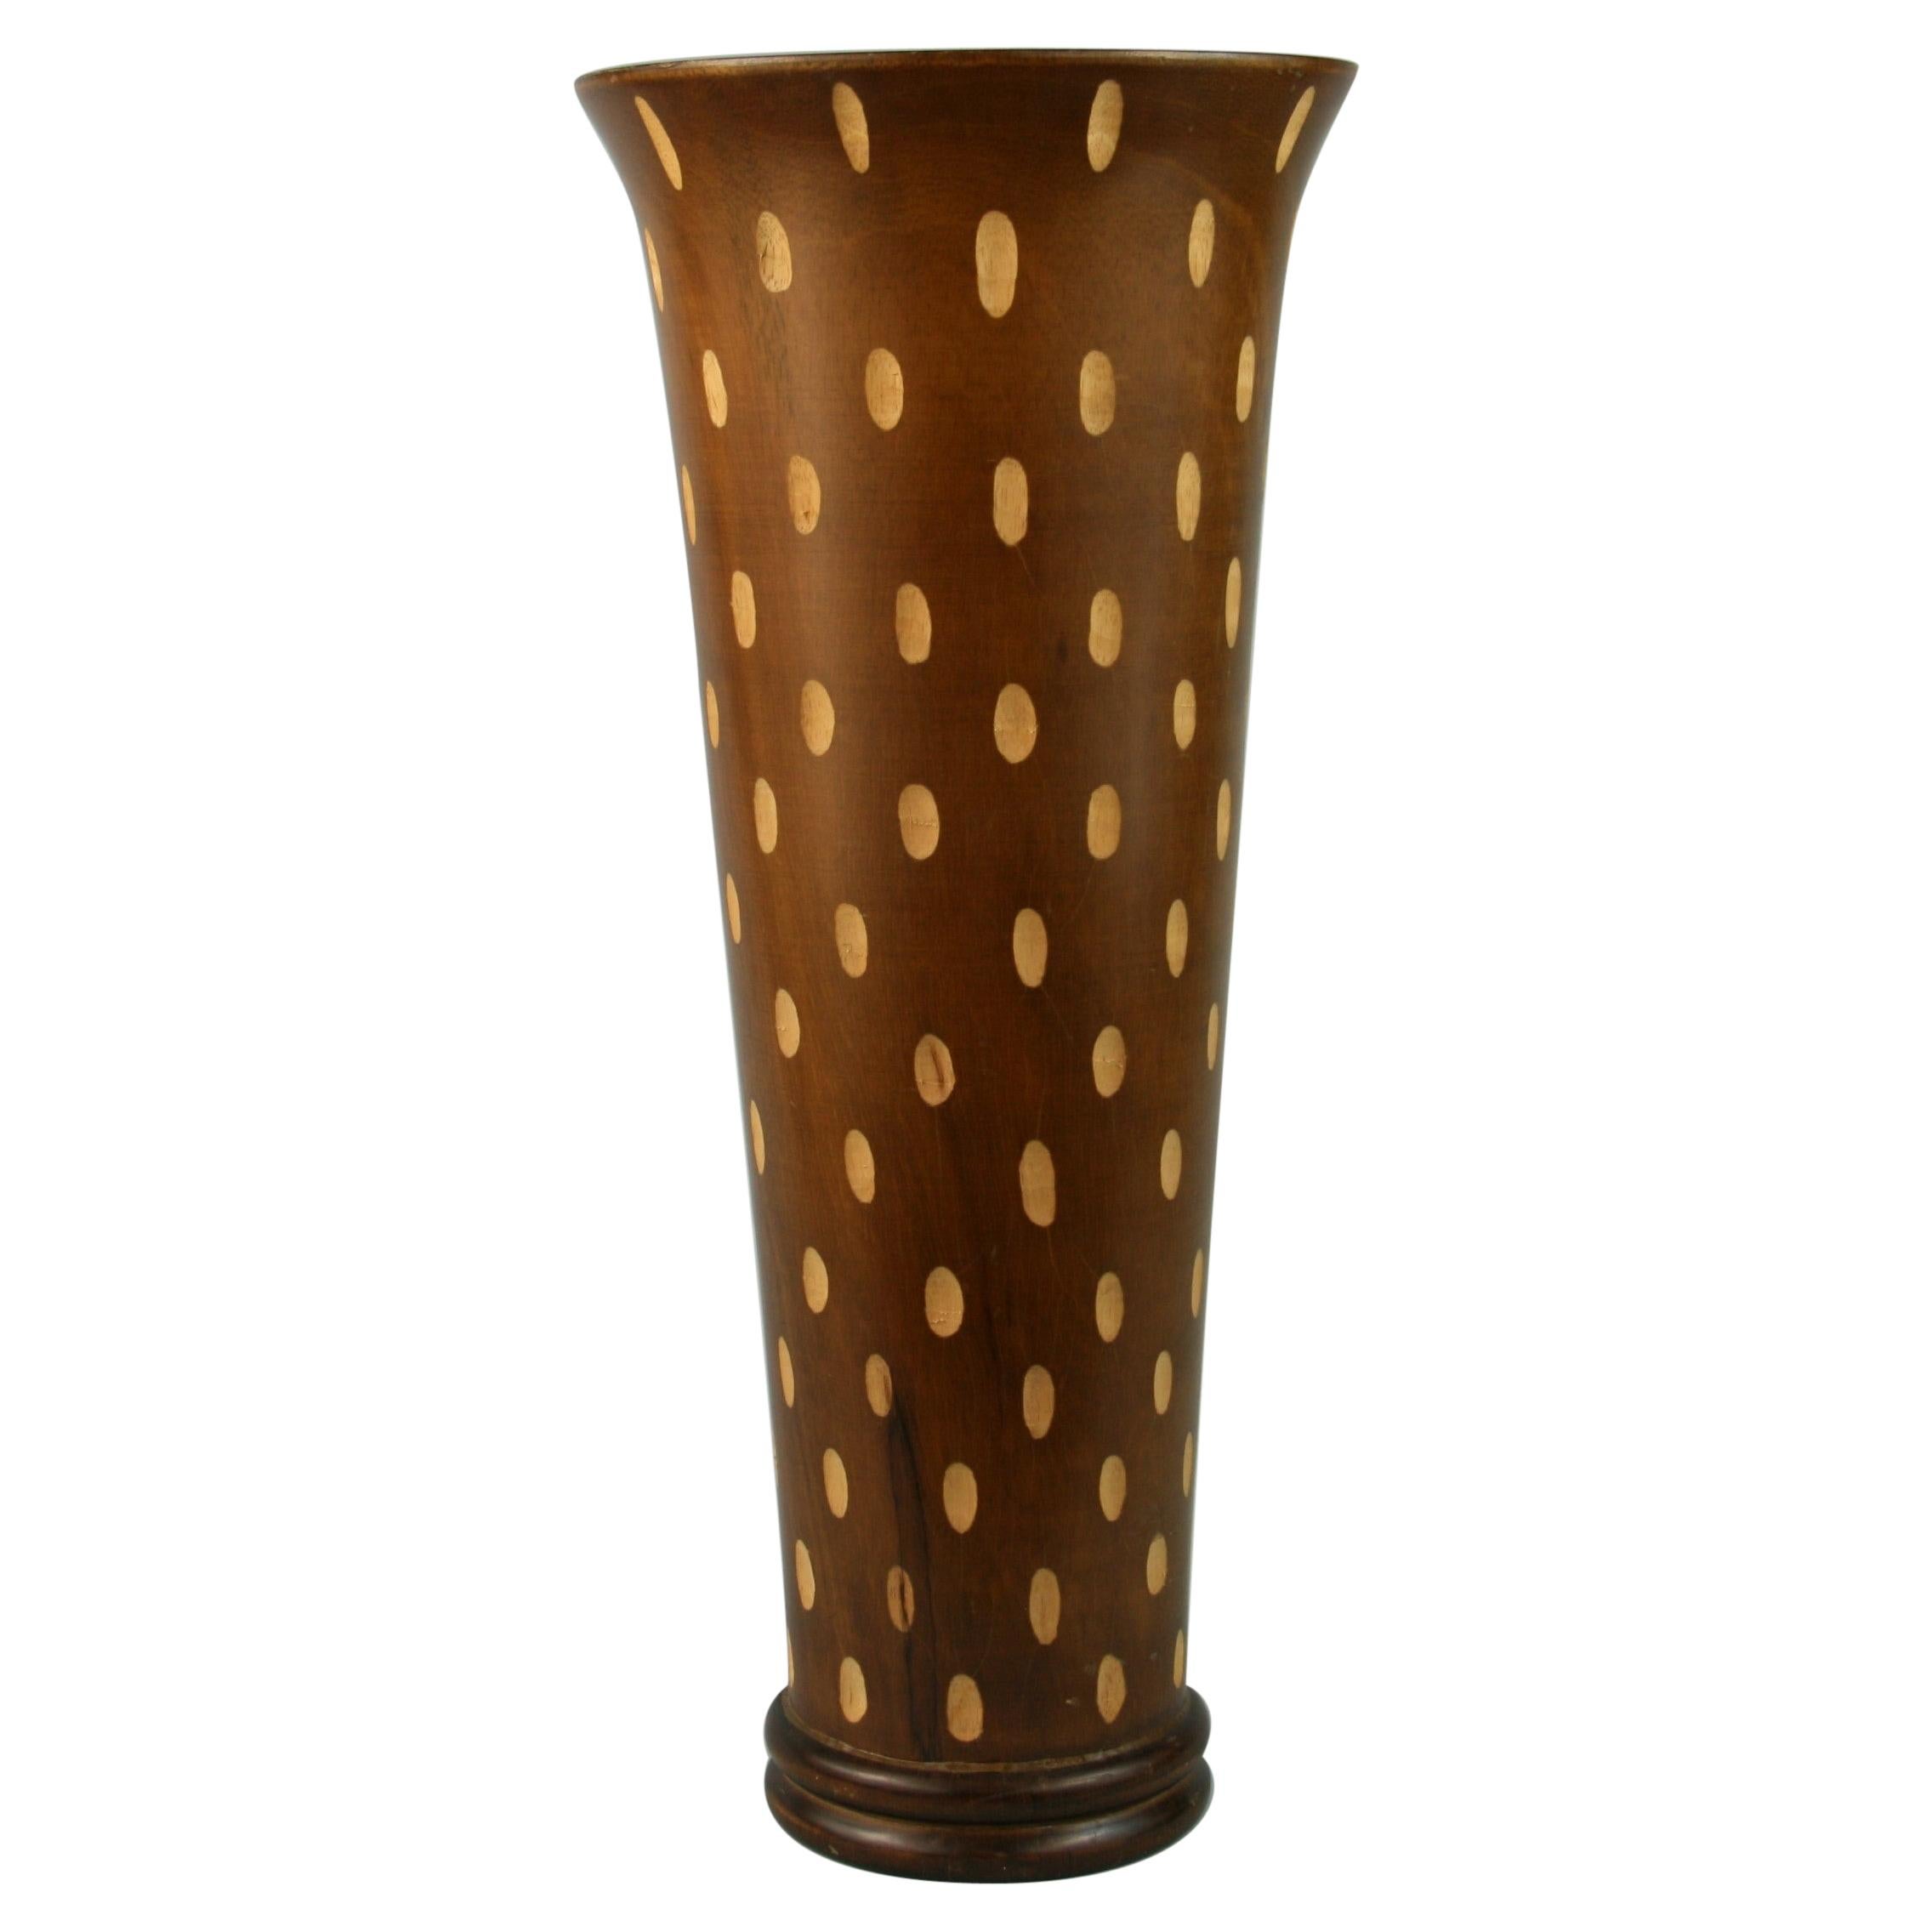 Japanese Art Deco Style Wood Hand Turned Vase with Incised Oval Cutouts For Sale